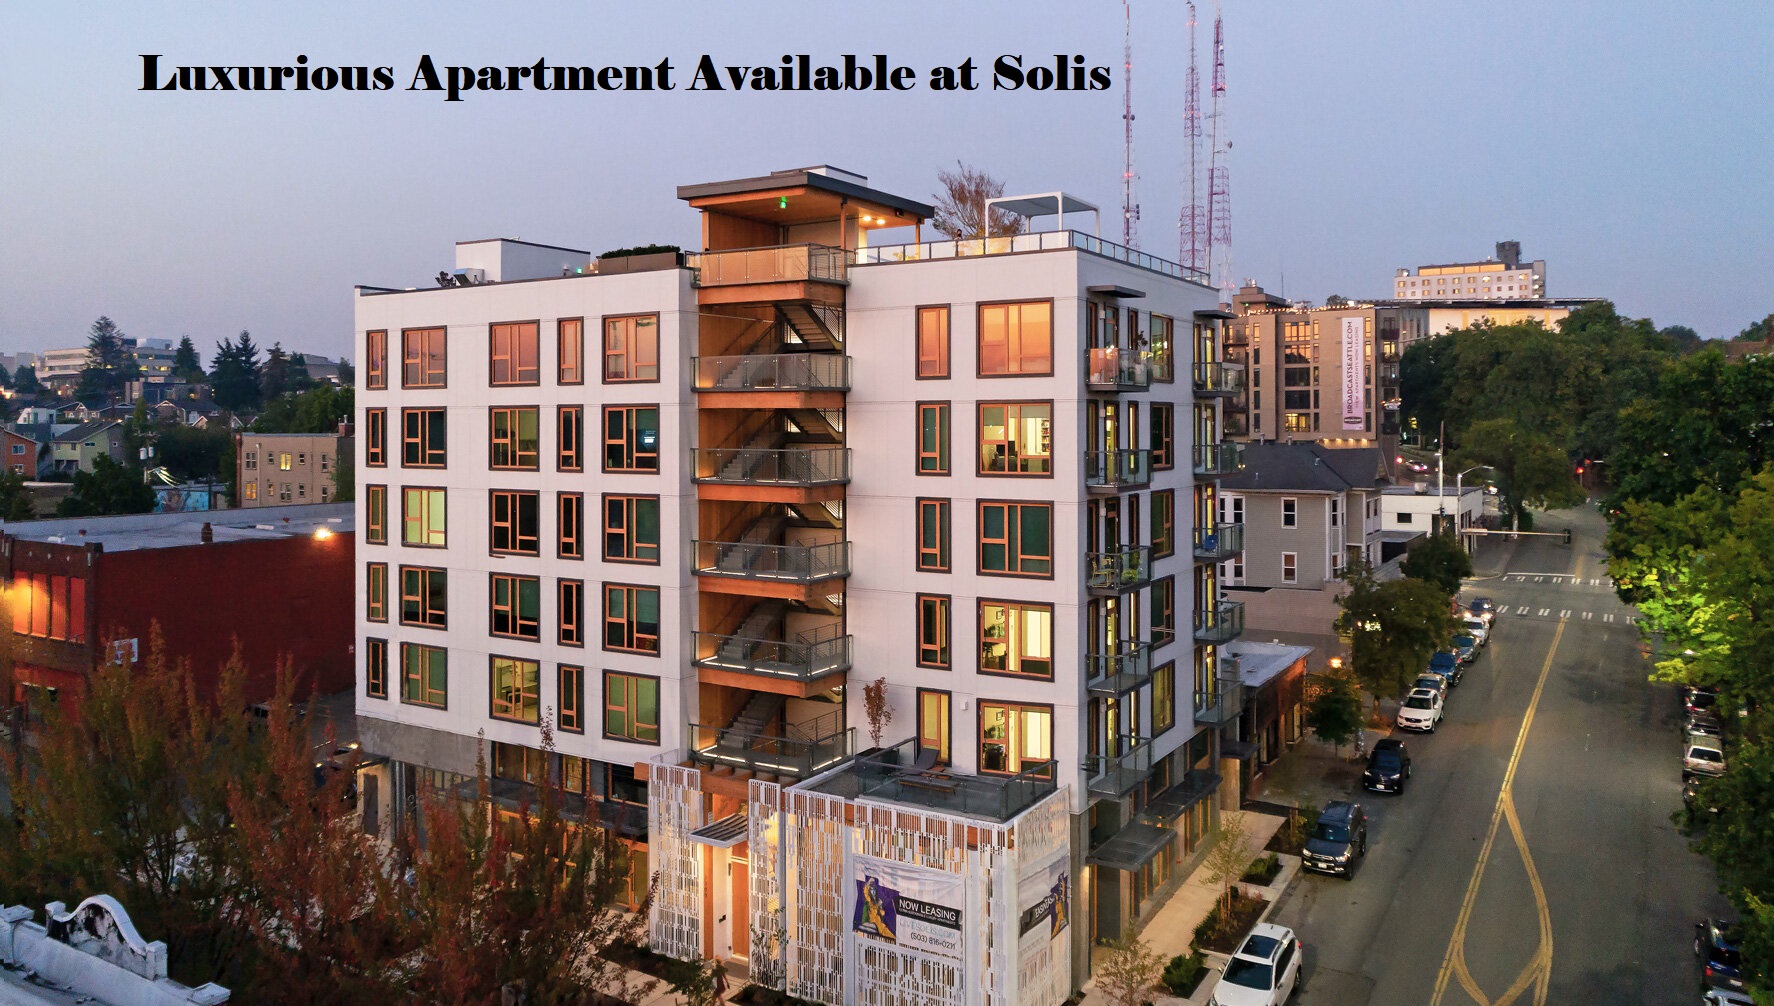 Luxurious Apartment Available at Solis